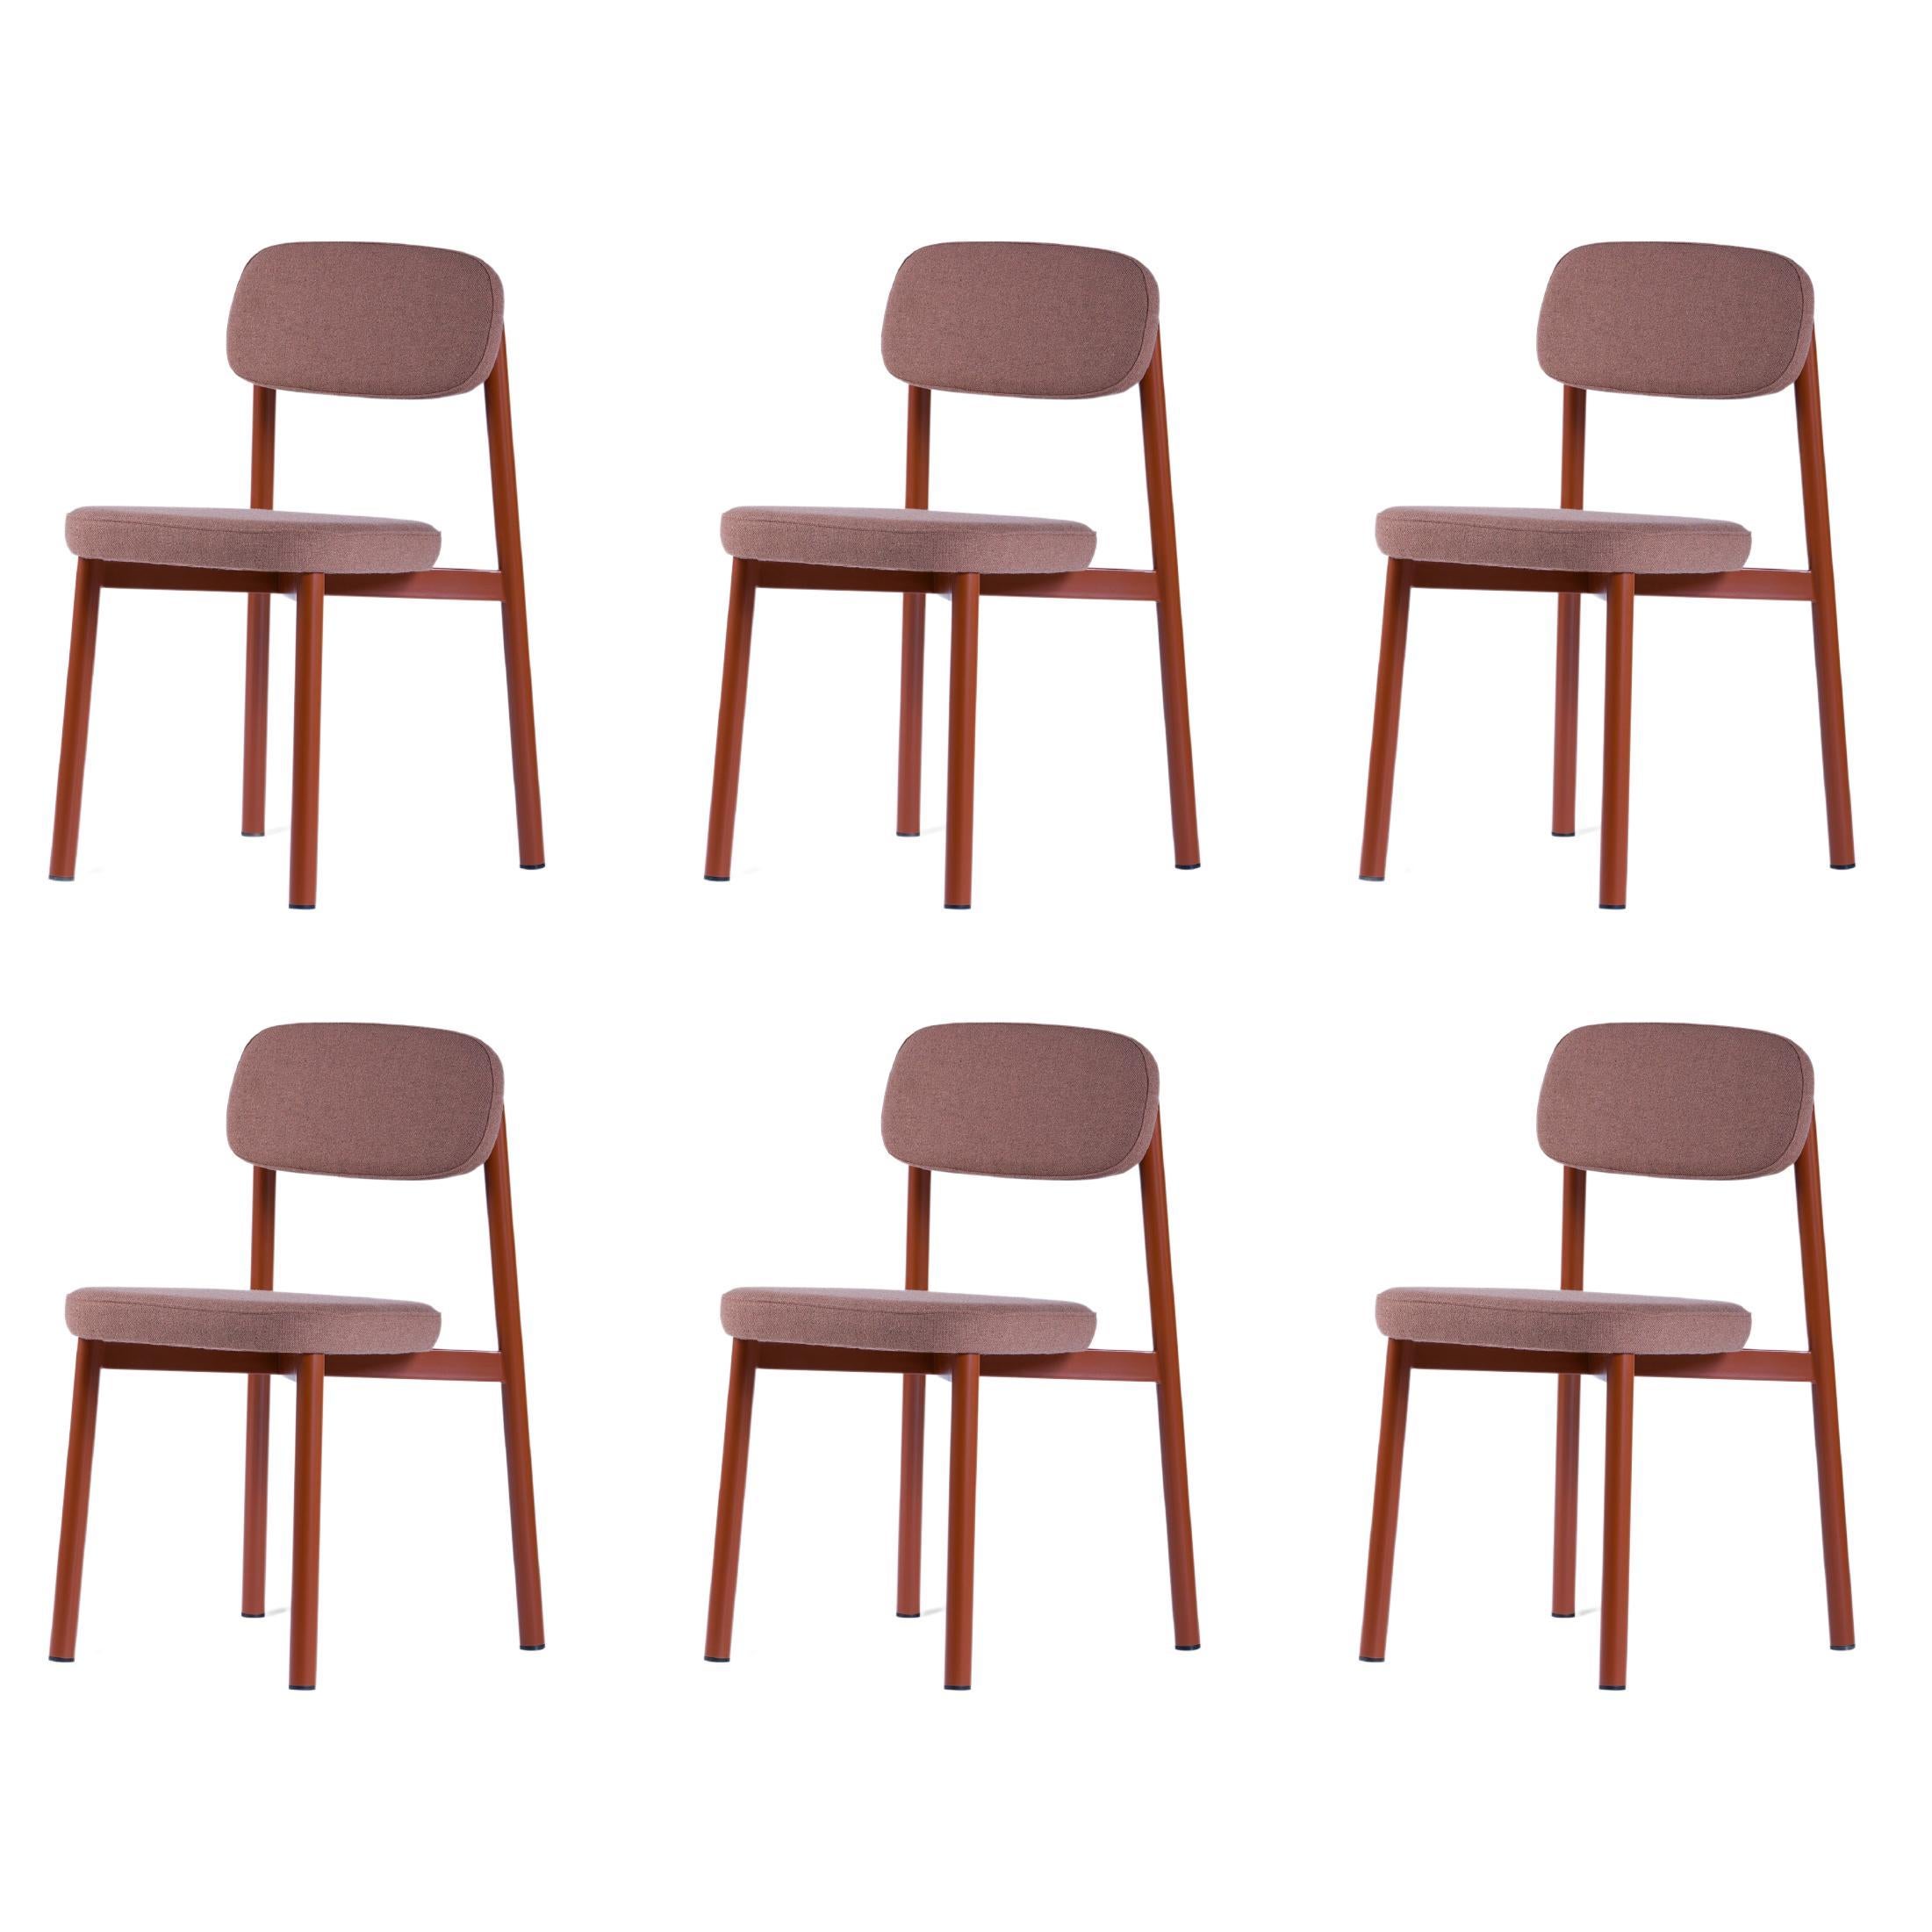 Set of 6 Dusty Pink Residence Chairs by Kann Design